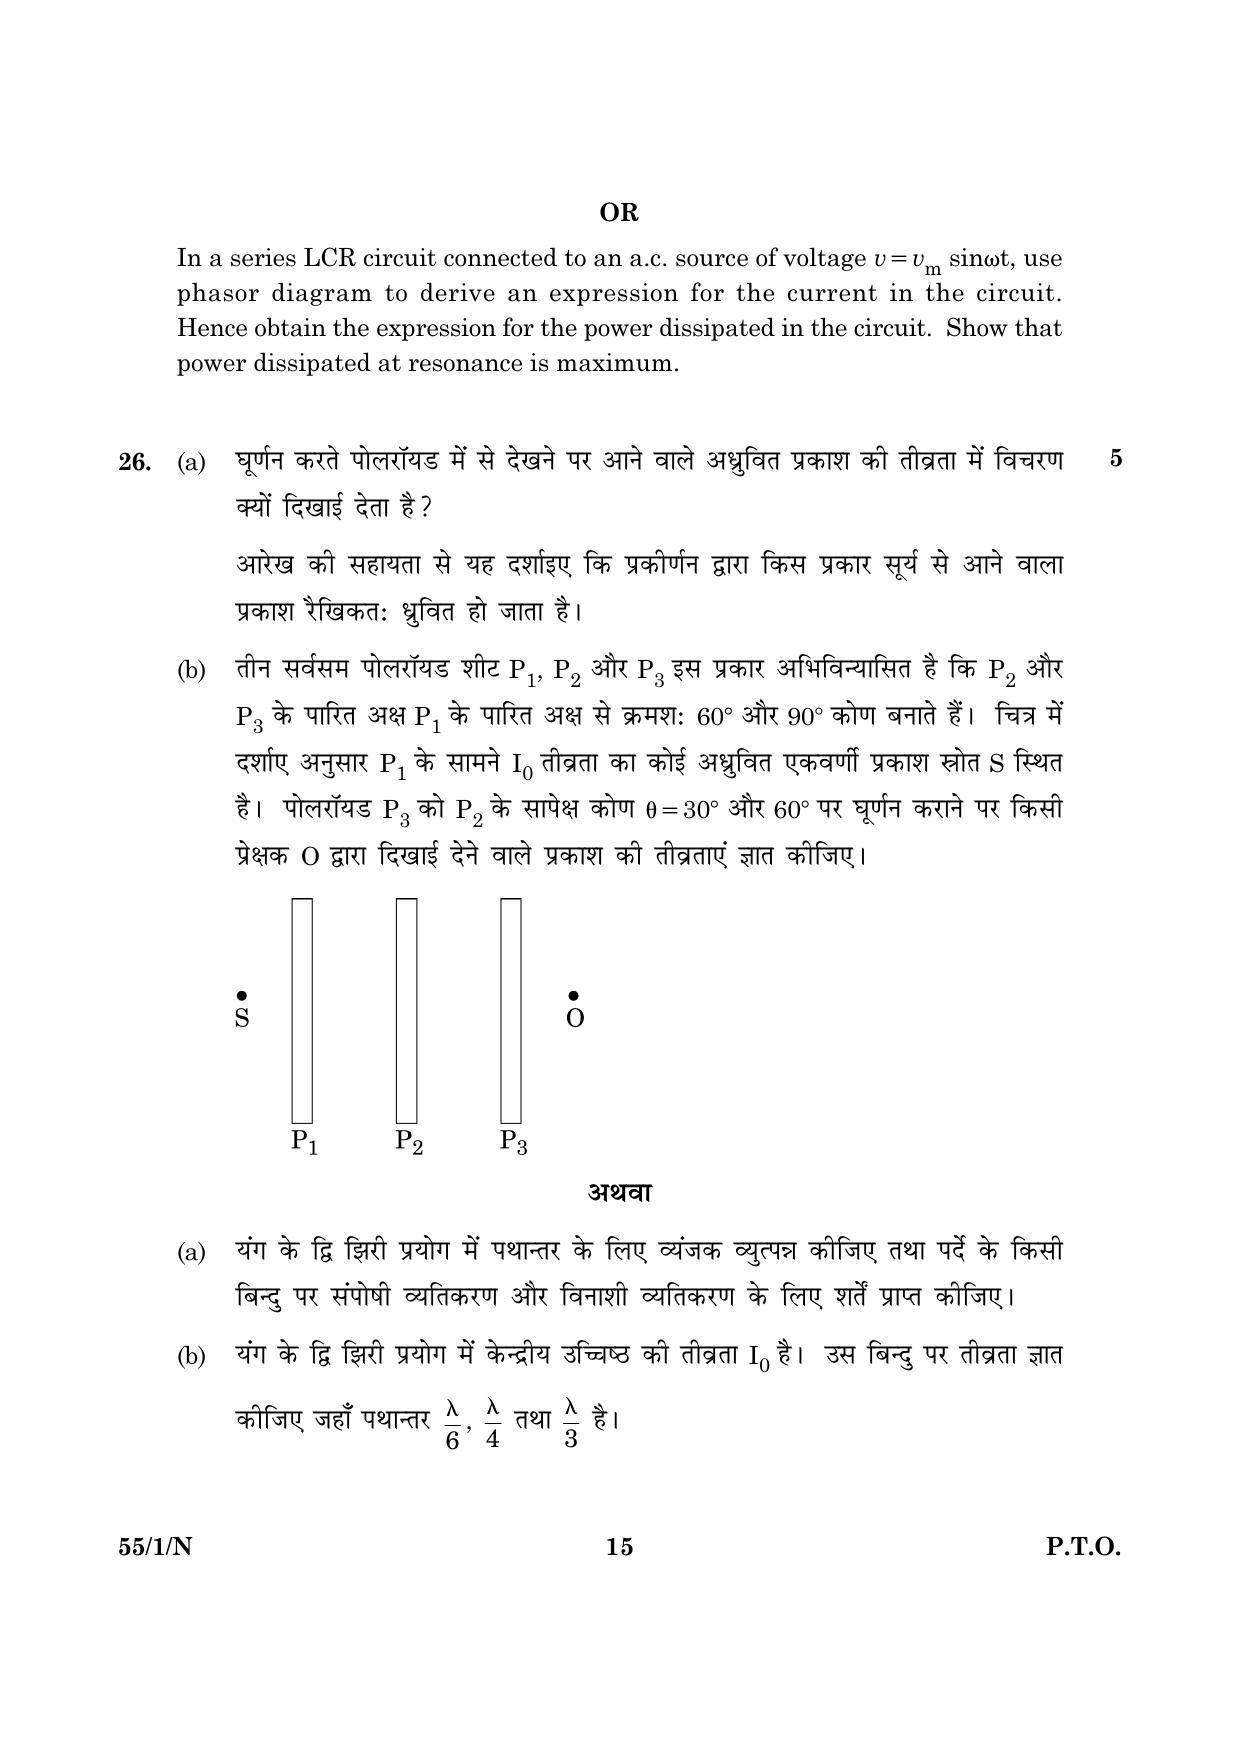 CBSE Class 12 055 Set 1 N Physics Theory 2016 Question Paper - Page 15